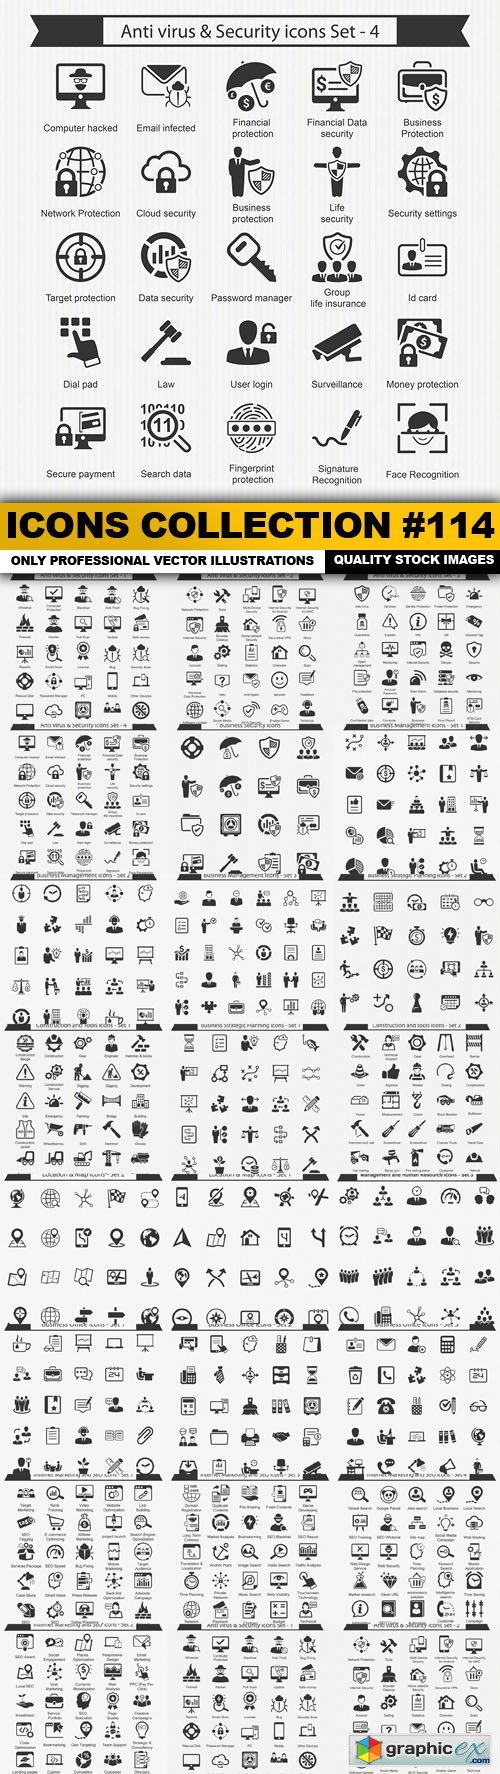 Icons Collection #114 - 22 Vector